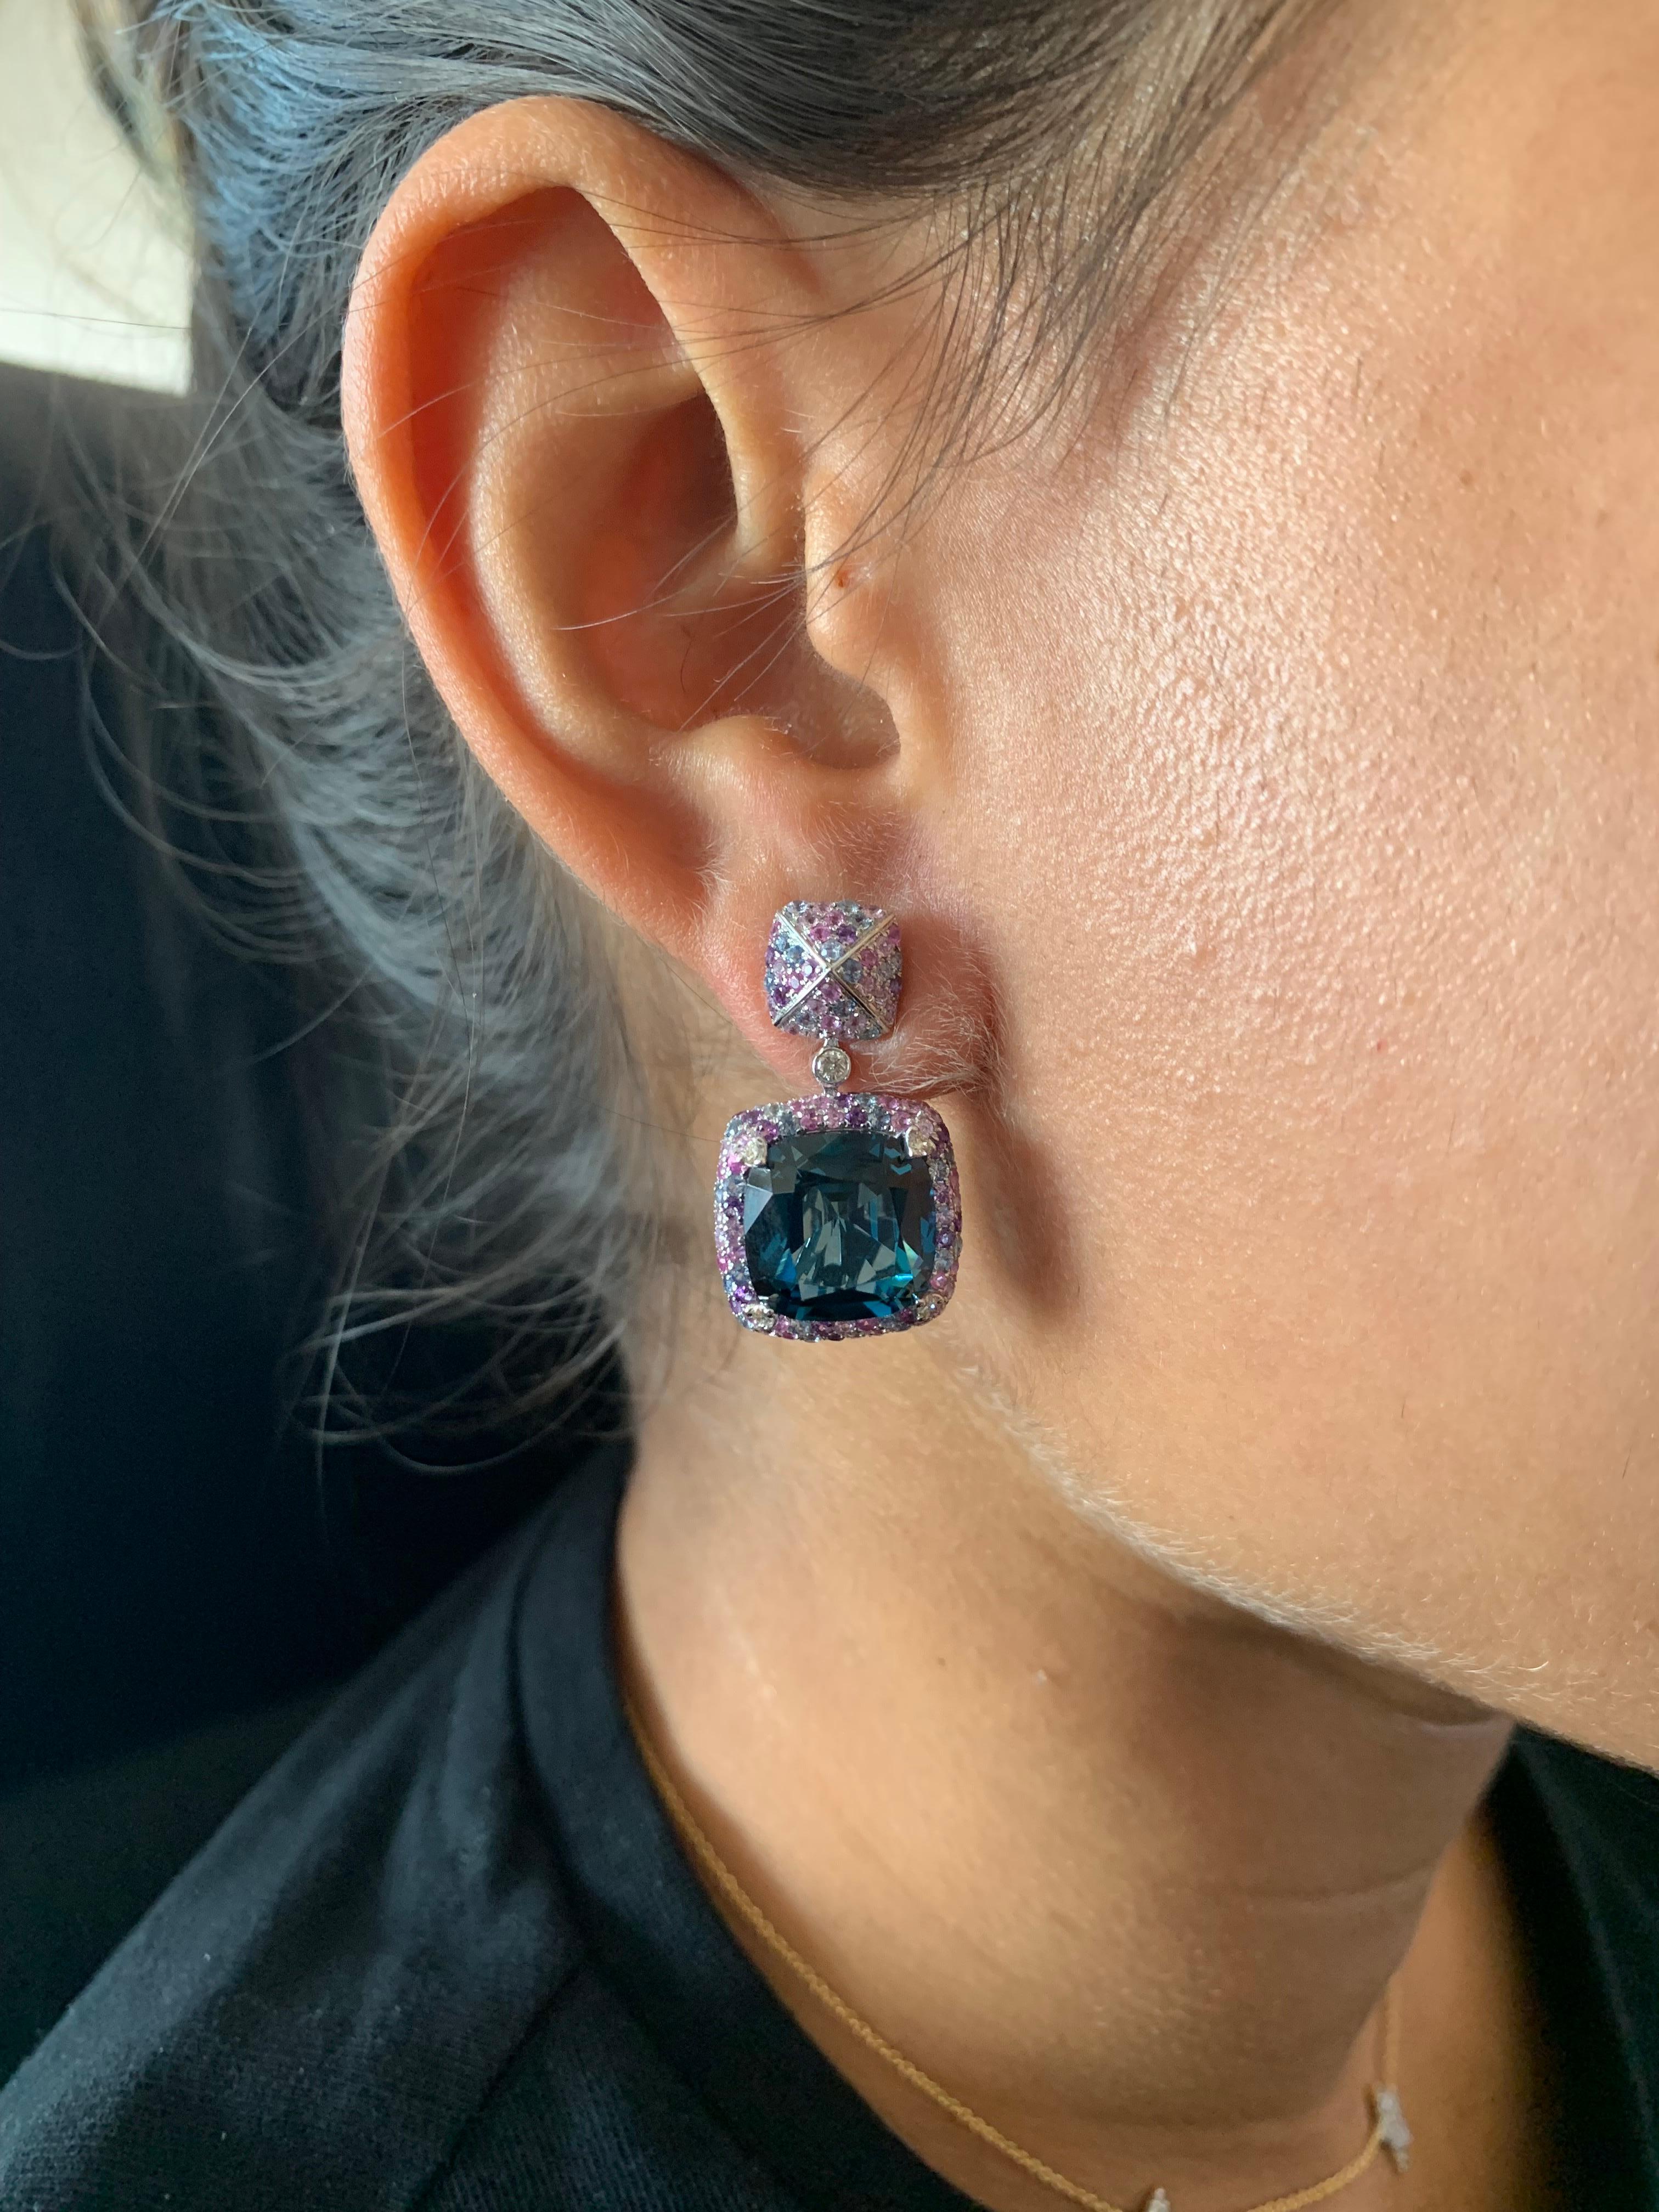 Bold Blue Topaz! Light and easy to wear these earrings showcase deep blue topaz accented with a multi color gemstone and diamond frame. These earrings are dainty yet have a great pop of color from the vibrant gems.

Blue Topaz Candy Earrings with